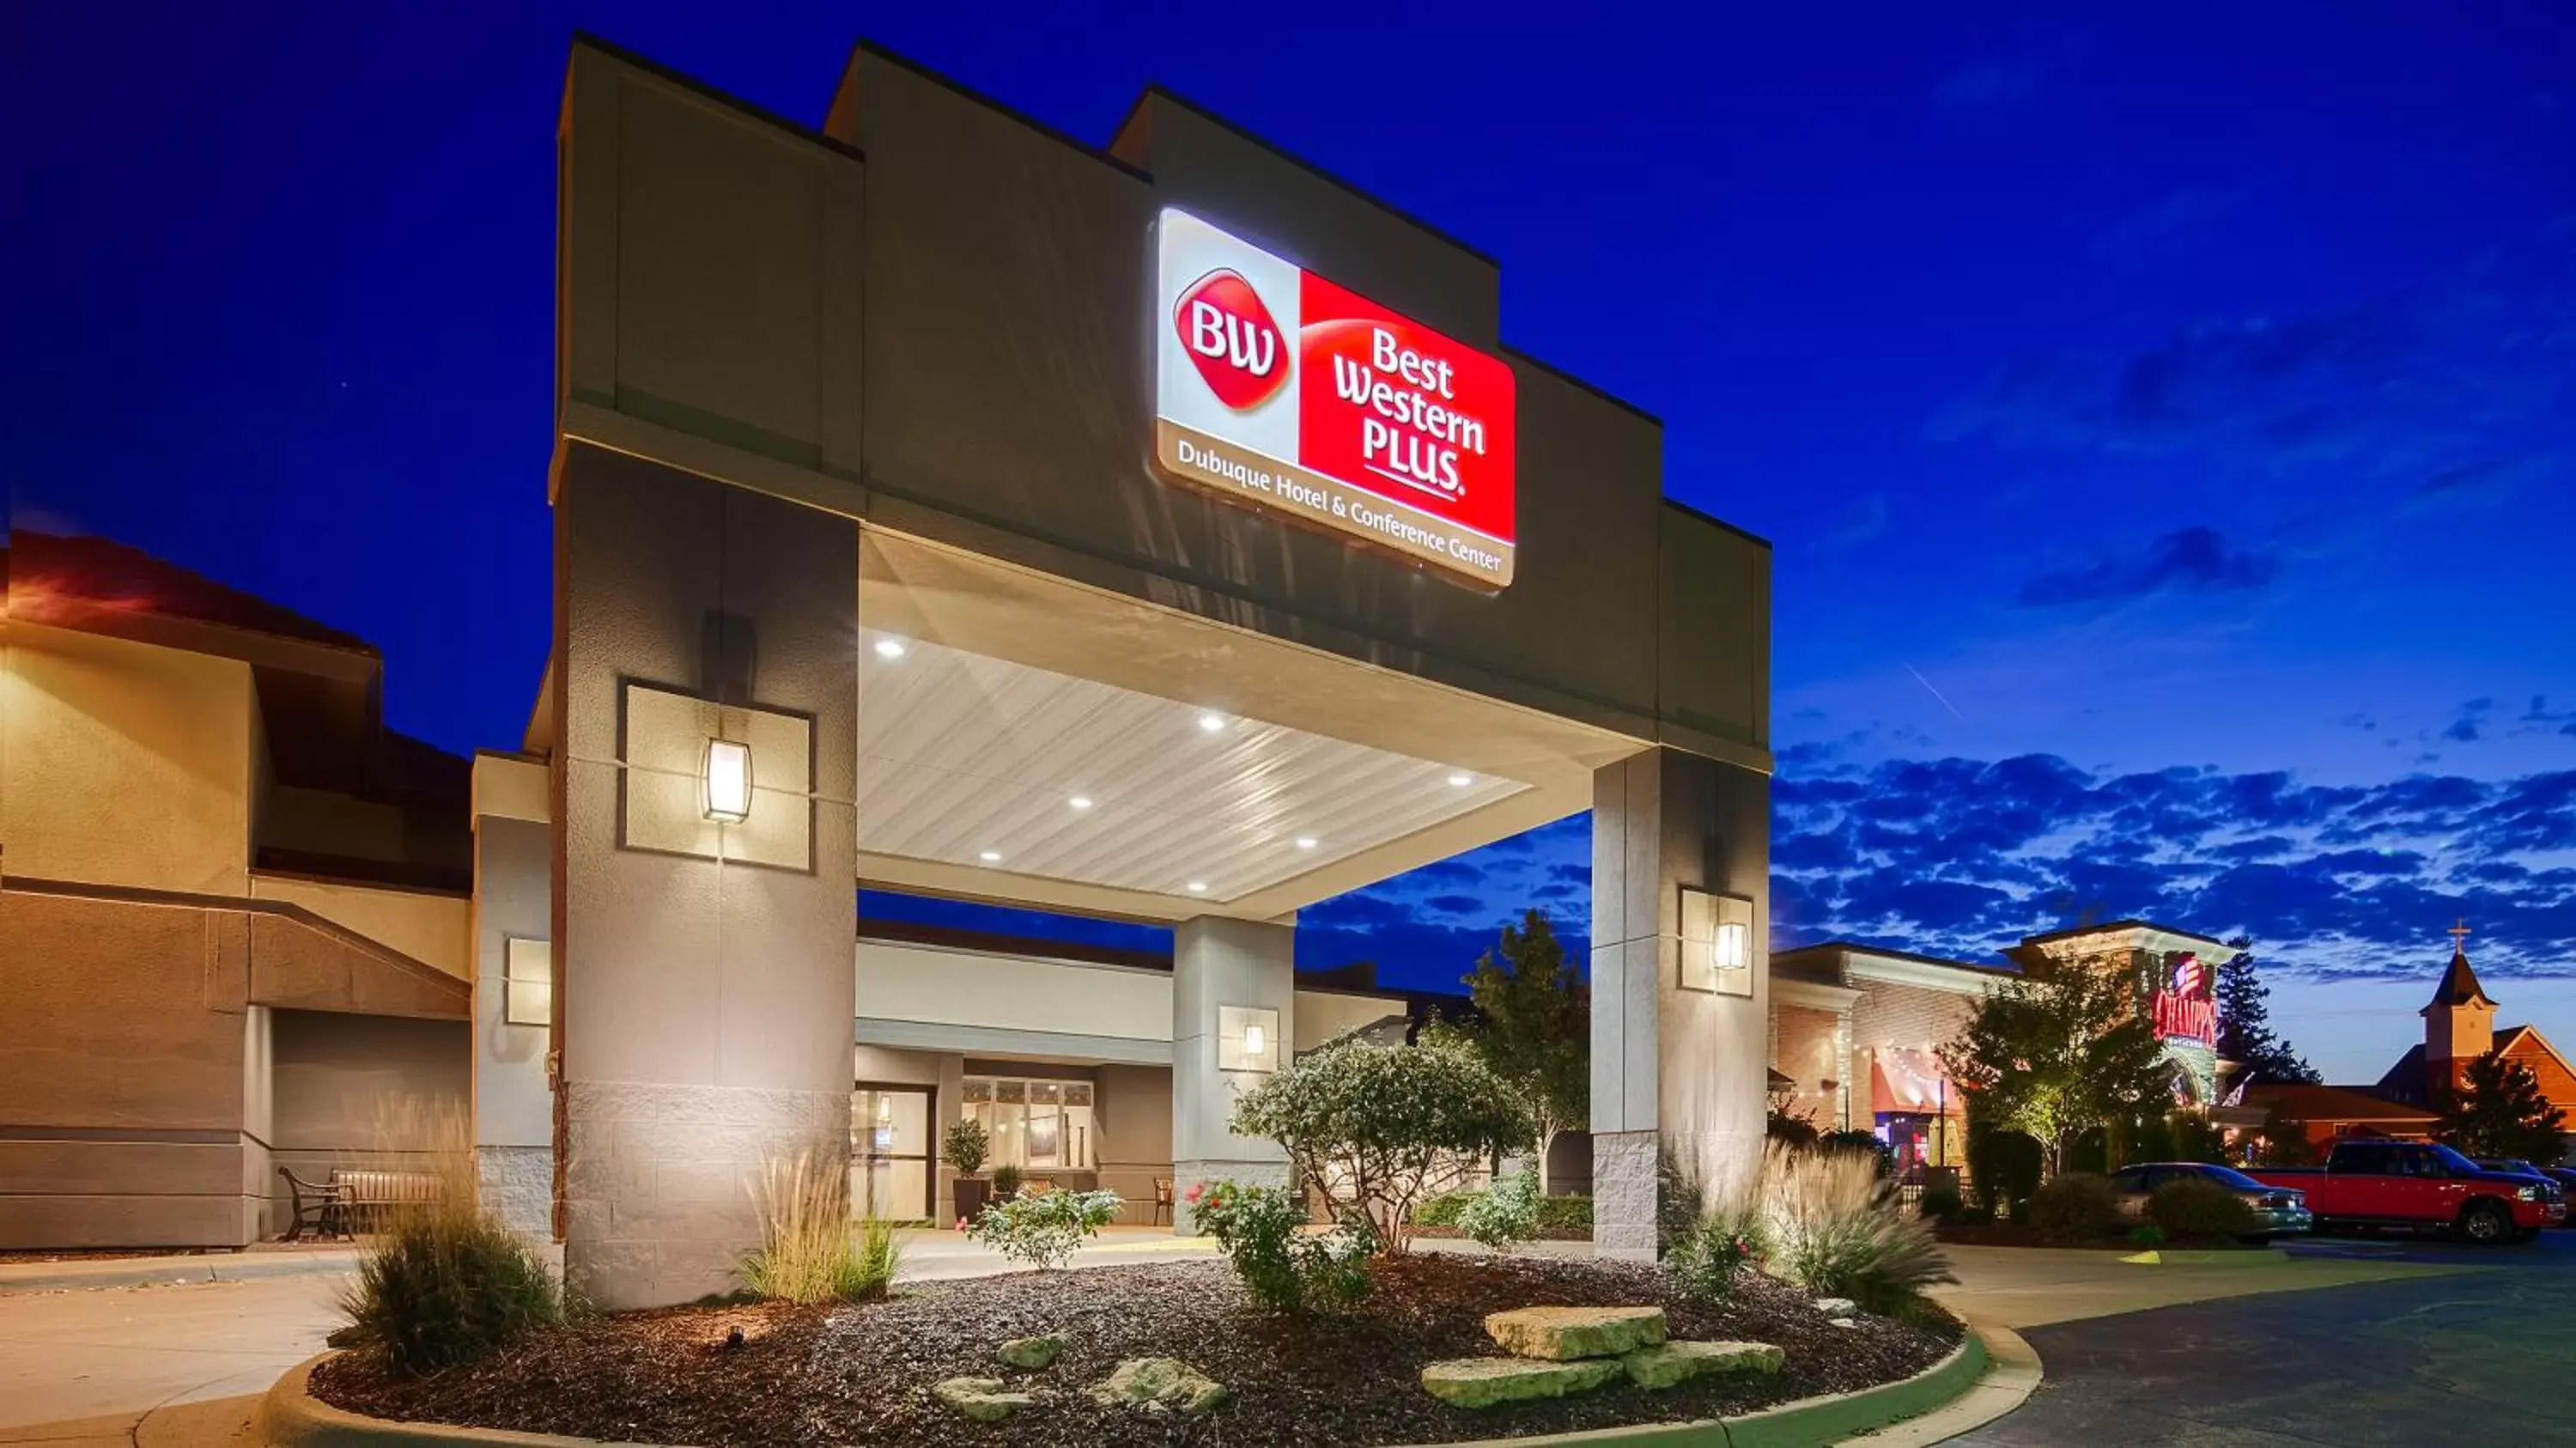 Property Building in Best Western Plus Dubuque Hotel and Conference Center